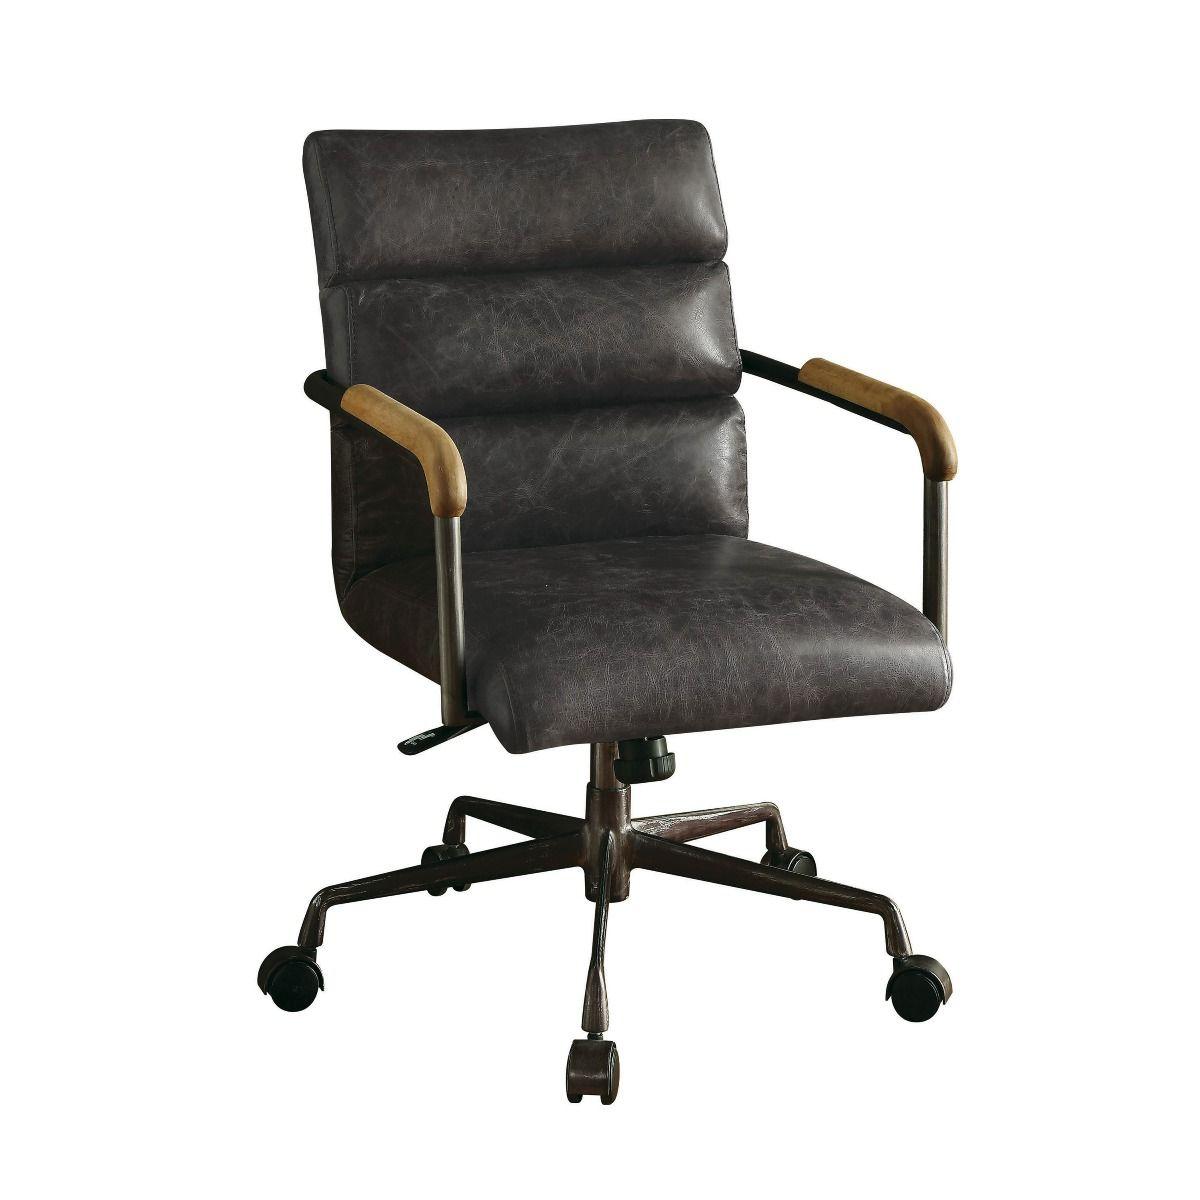 Contemporary Executive Office Chair Harith 92415 in Slate Top grain leather